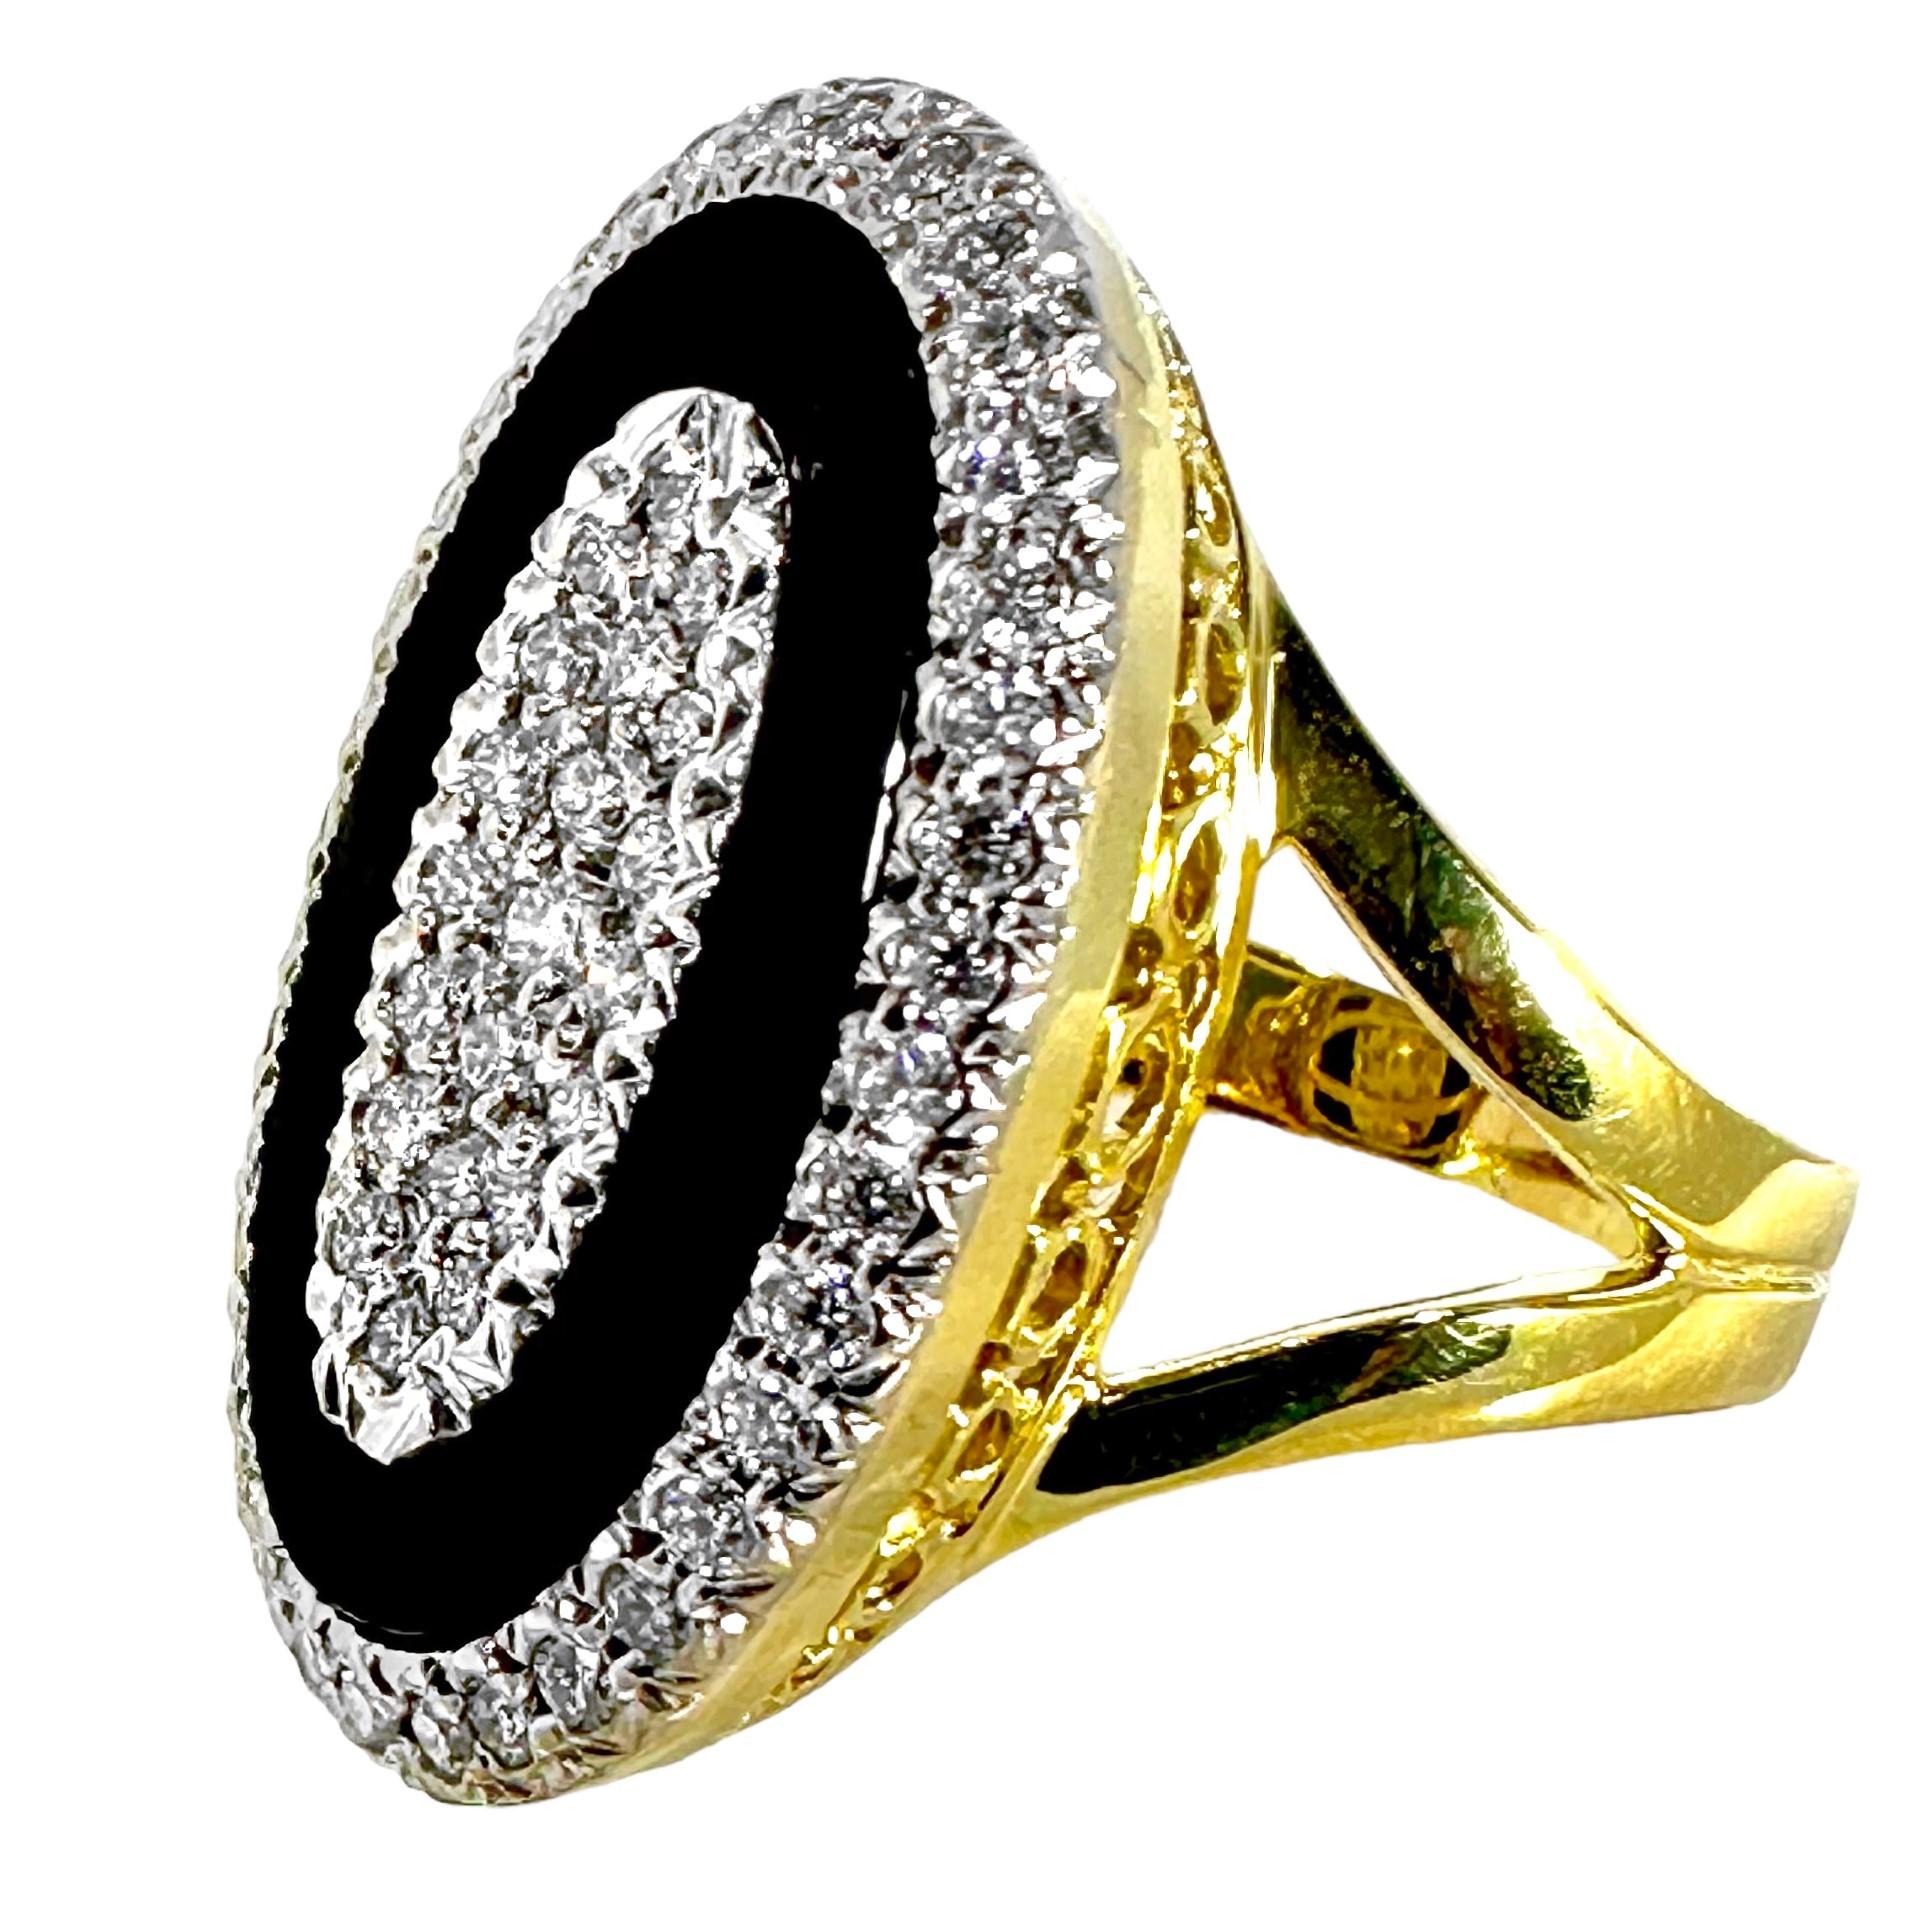 Women's Onyx, Diamond and 18K Gold, Oval Shaped Ring 1 Inch Long x 5/8 Inch Wide For Sale